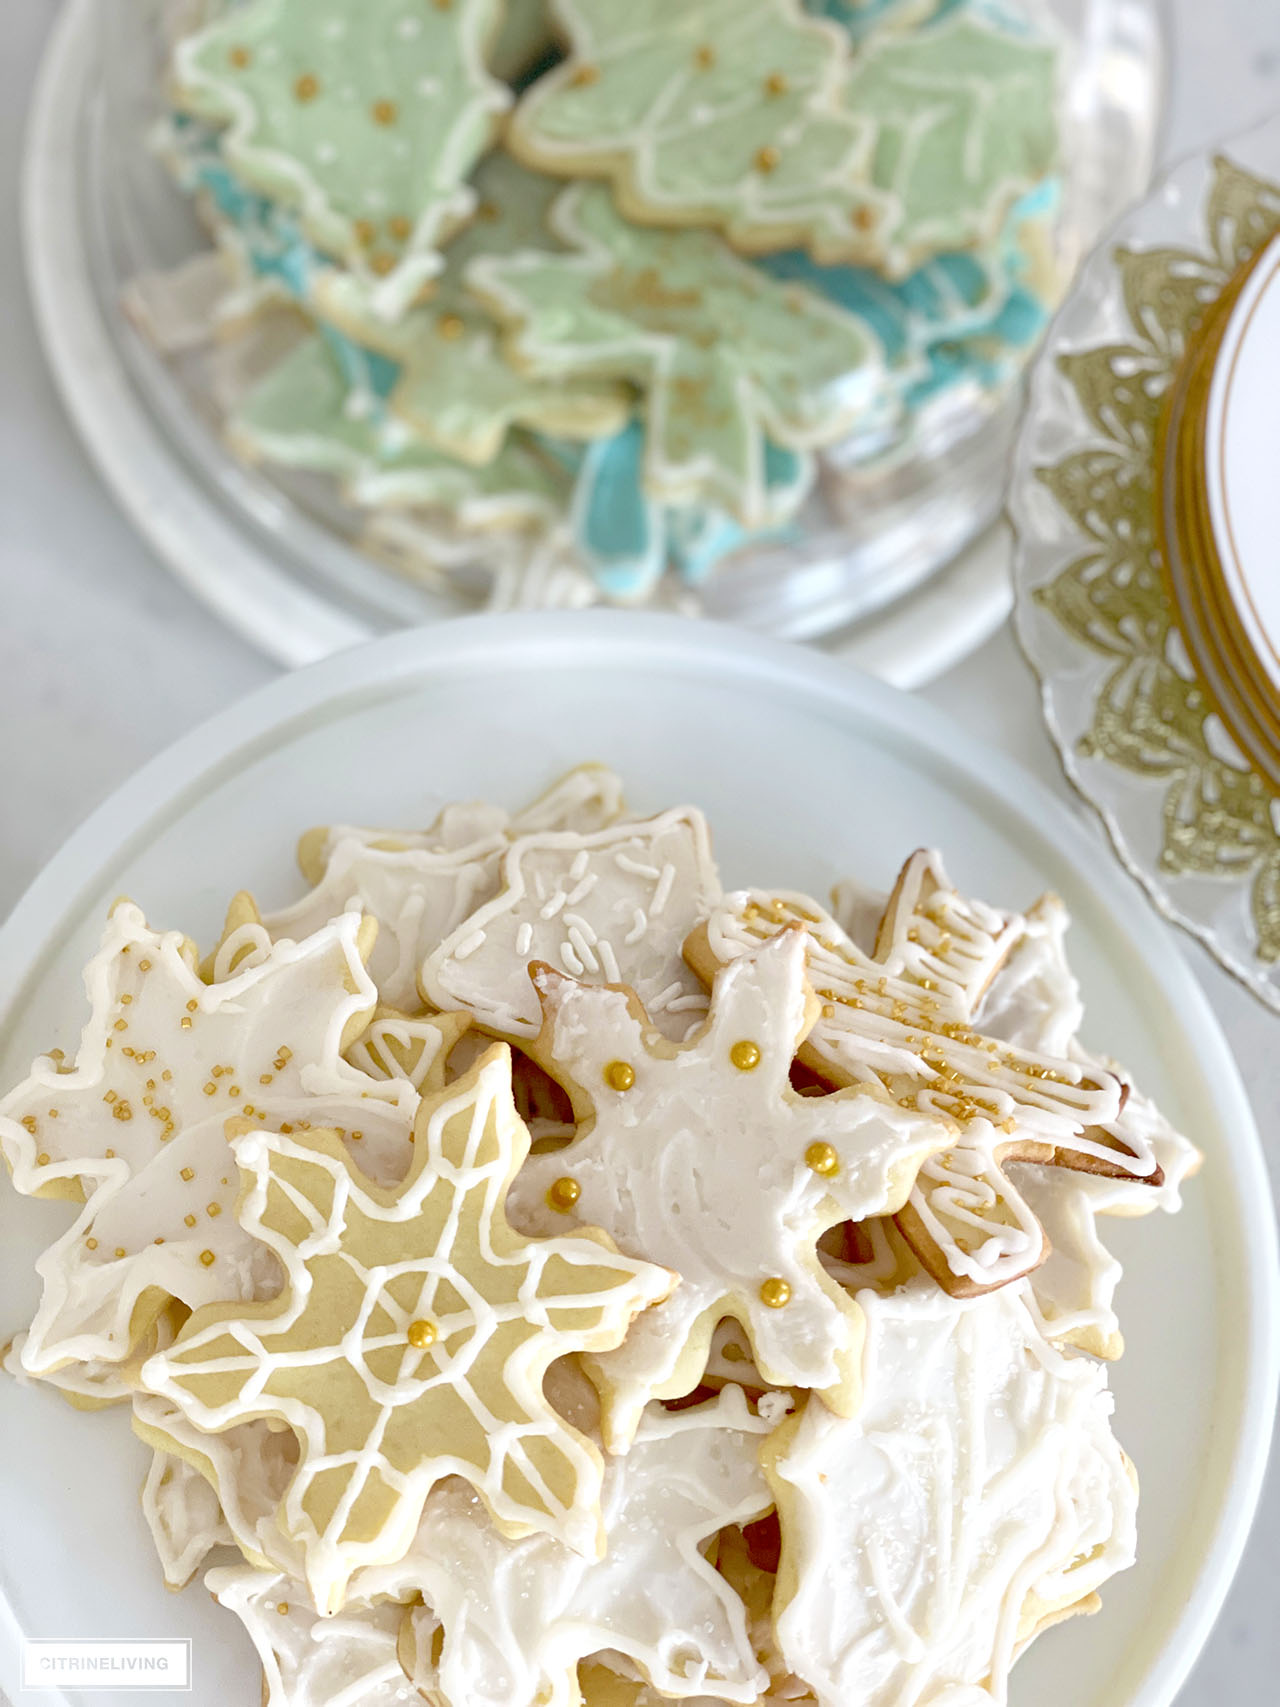 Beautiful assortment of white decorated Christmas sugar cookies.